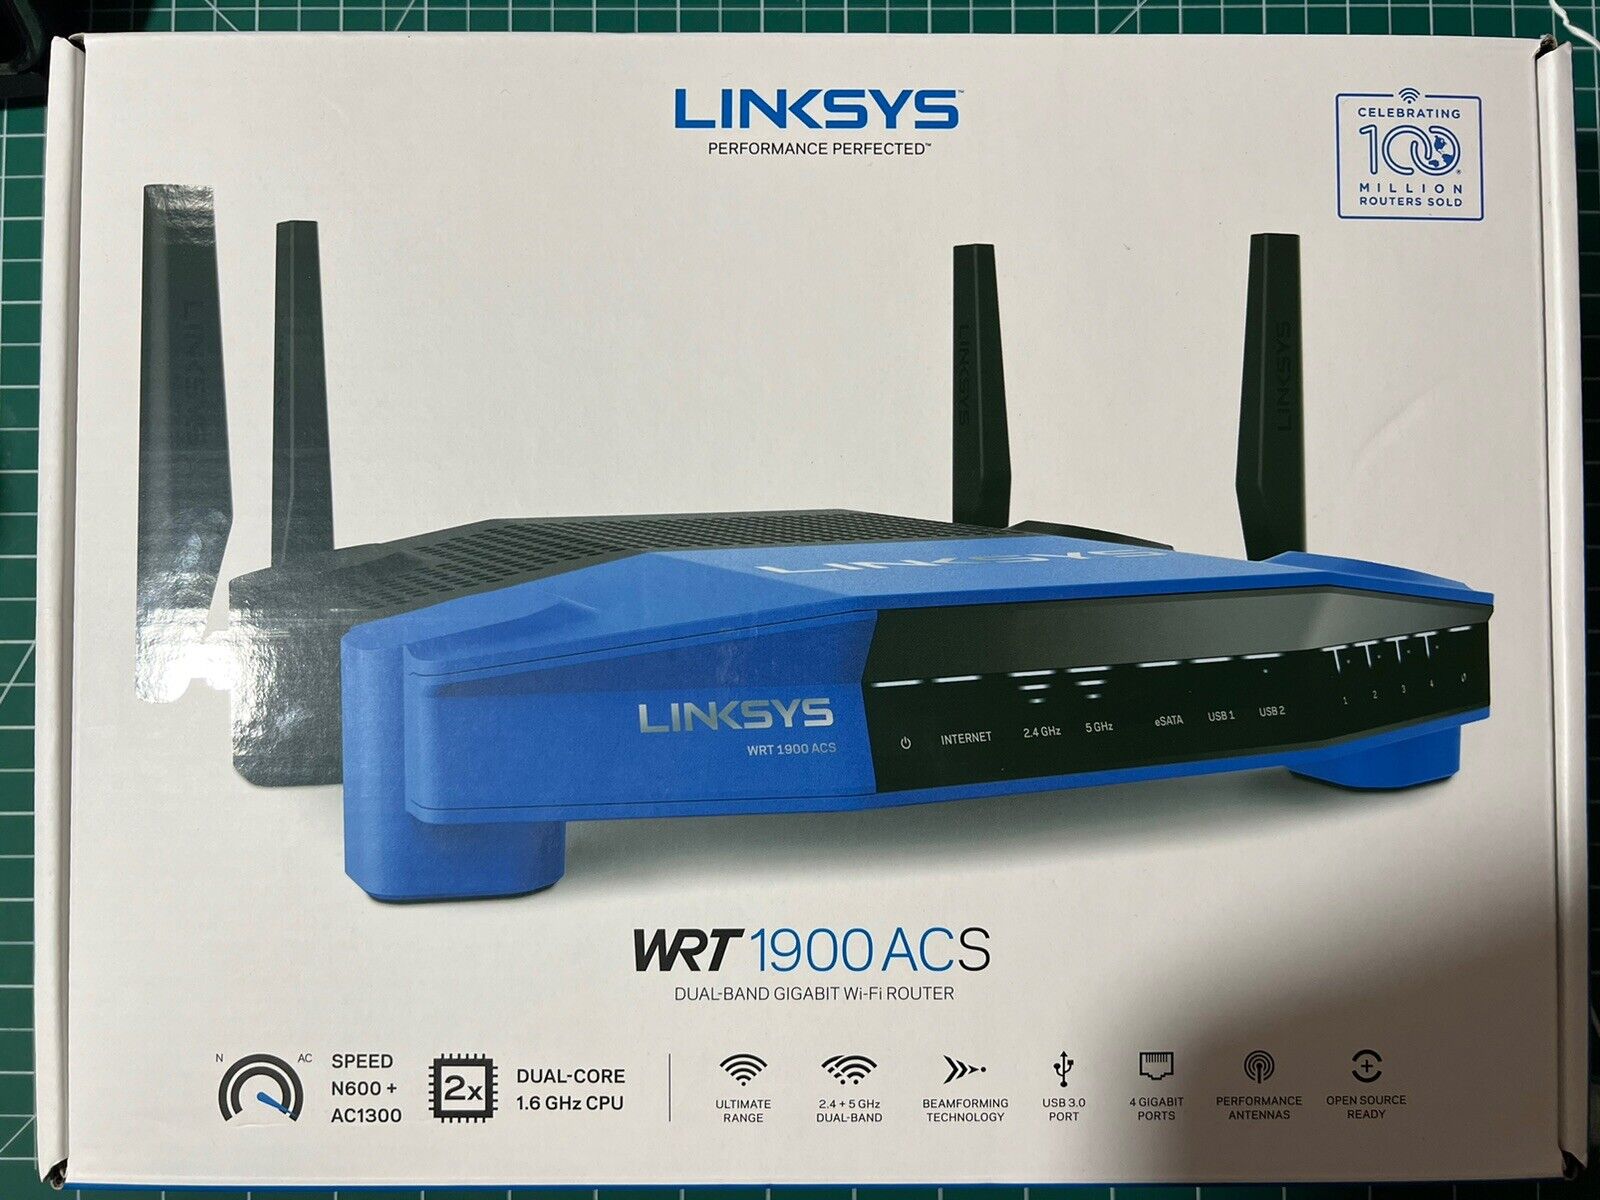 Linksys WRT1900ACS V2 Dual-Band Wi-Fi Router OFW Ver. 2.0.3.201002